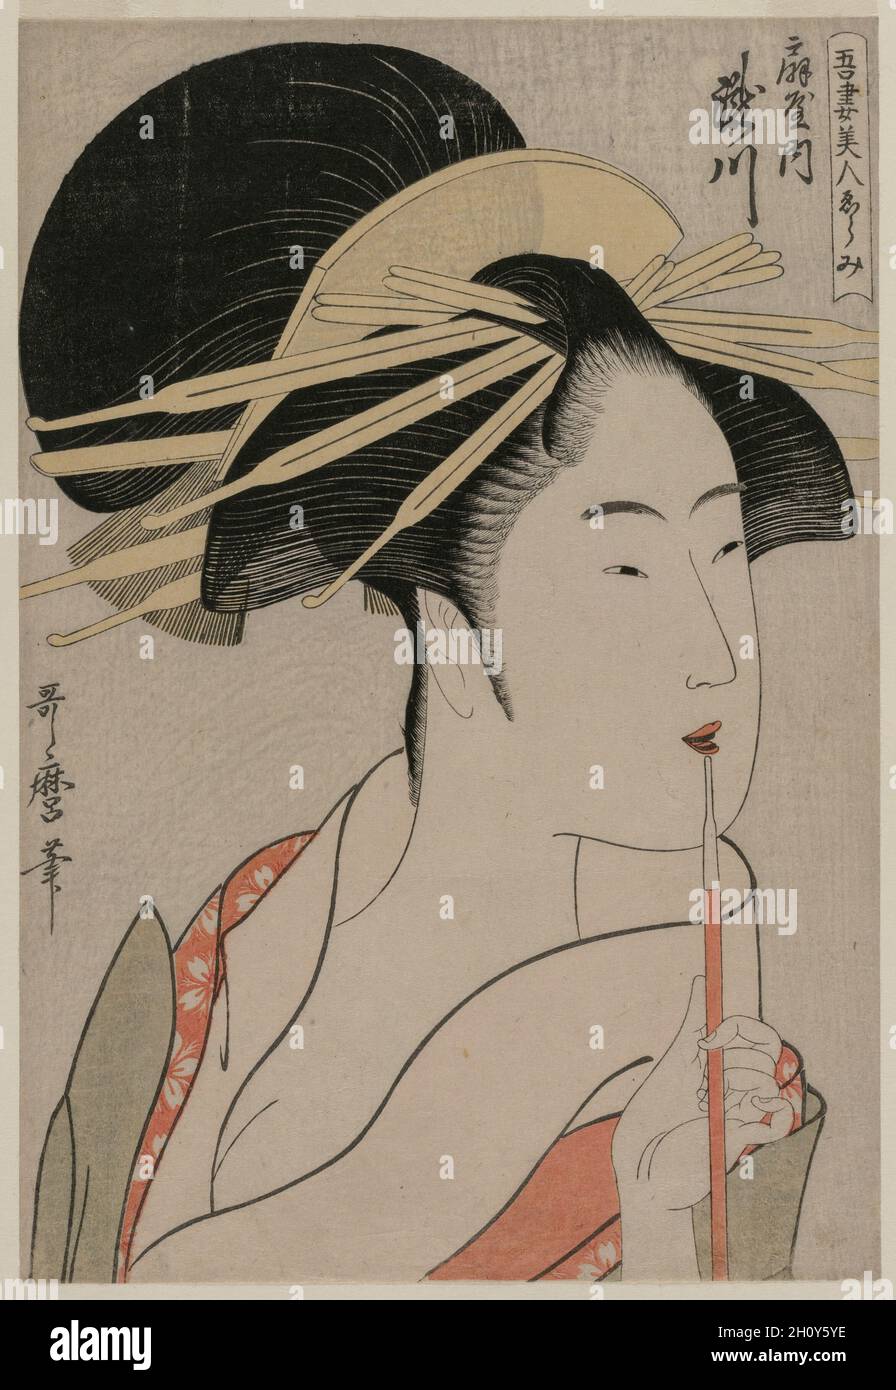 The Courtesan Takigawa of Ogiya (from the series A Selection of Beautiful Women of the East), c. 1798. Kitagawa Utamaro (Japanese, 1753?-1806). Color woodblock print; sheet: 33 x 22.3 cm (13 x 8 3/4 in.).  The courtesan Takigawa worked for the Ogiya, 'House of Fans' brothel, one of the most prestigious in the Yoshiwara. Here, she smokes tobacco, a fashionable trend in 18th-century Edo. Fashion-conscious women in Edo purchased prints of the most famous beauties just as contemporary women buy fashion magazines to learn about the latest styles in make-up and hair. The strands of hair at her templ Stock Photo